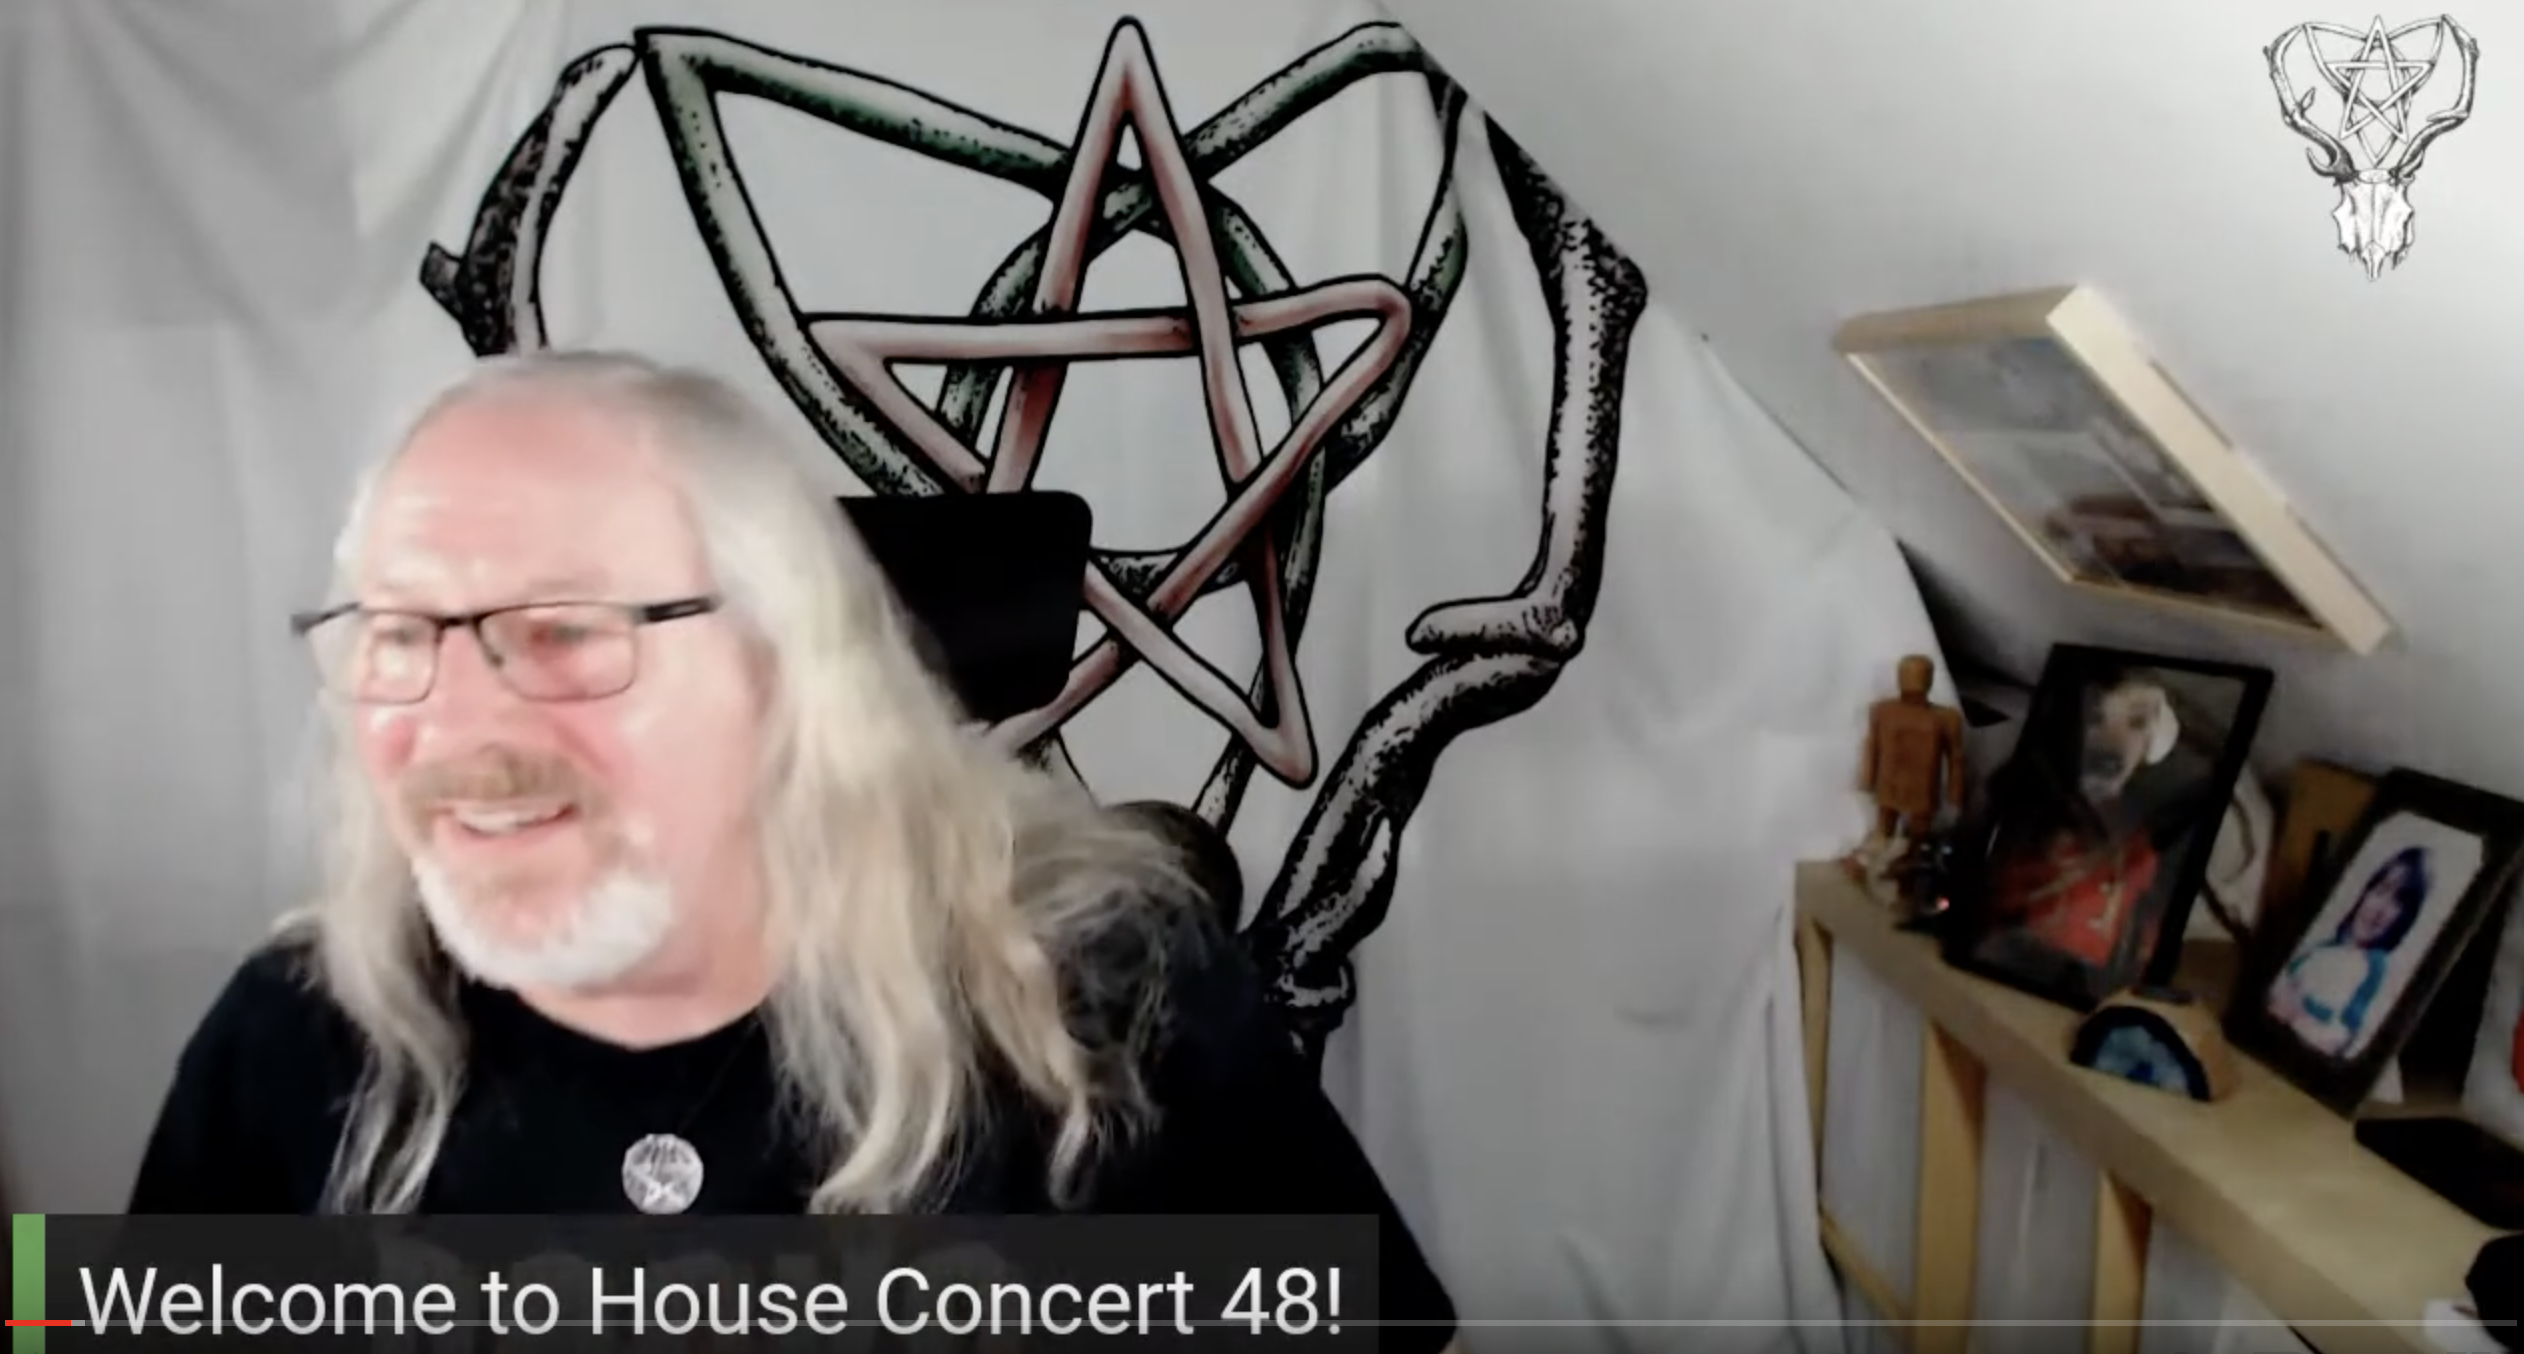 Video of House Concert 48